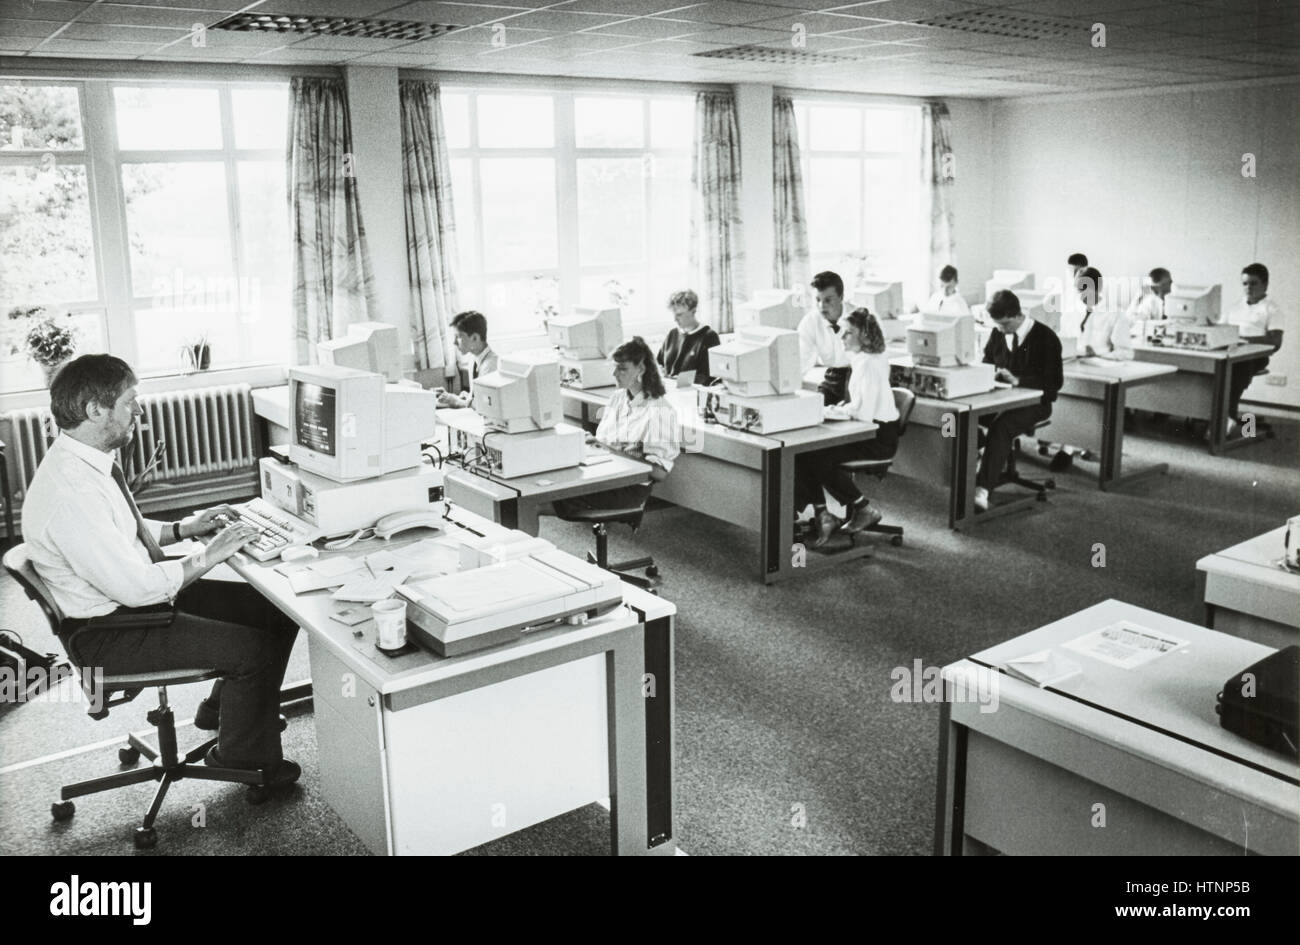 Archive image - Classrooms at Uckfield Comprehensive School photographed in the early 1980s. The school was later renamed Uckfield Community College. Stock Photo